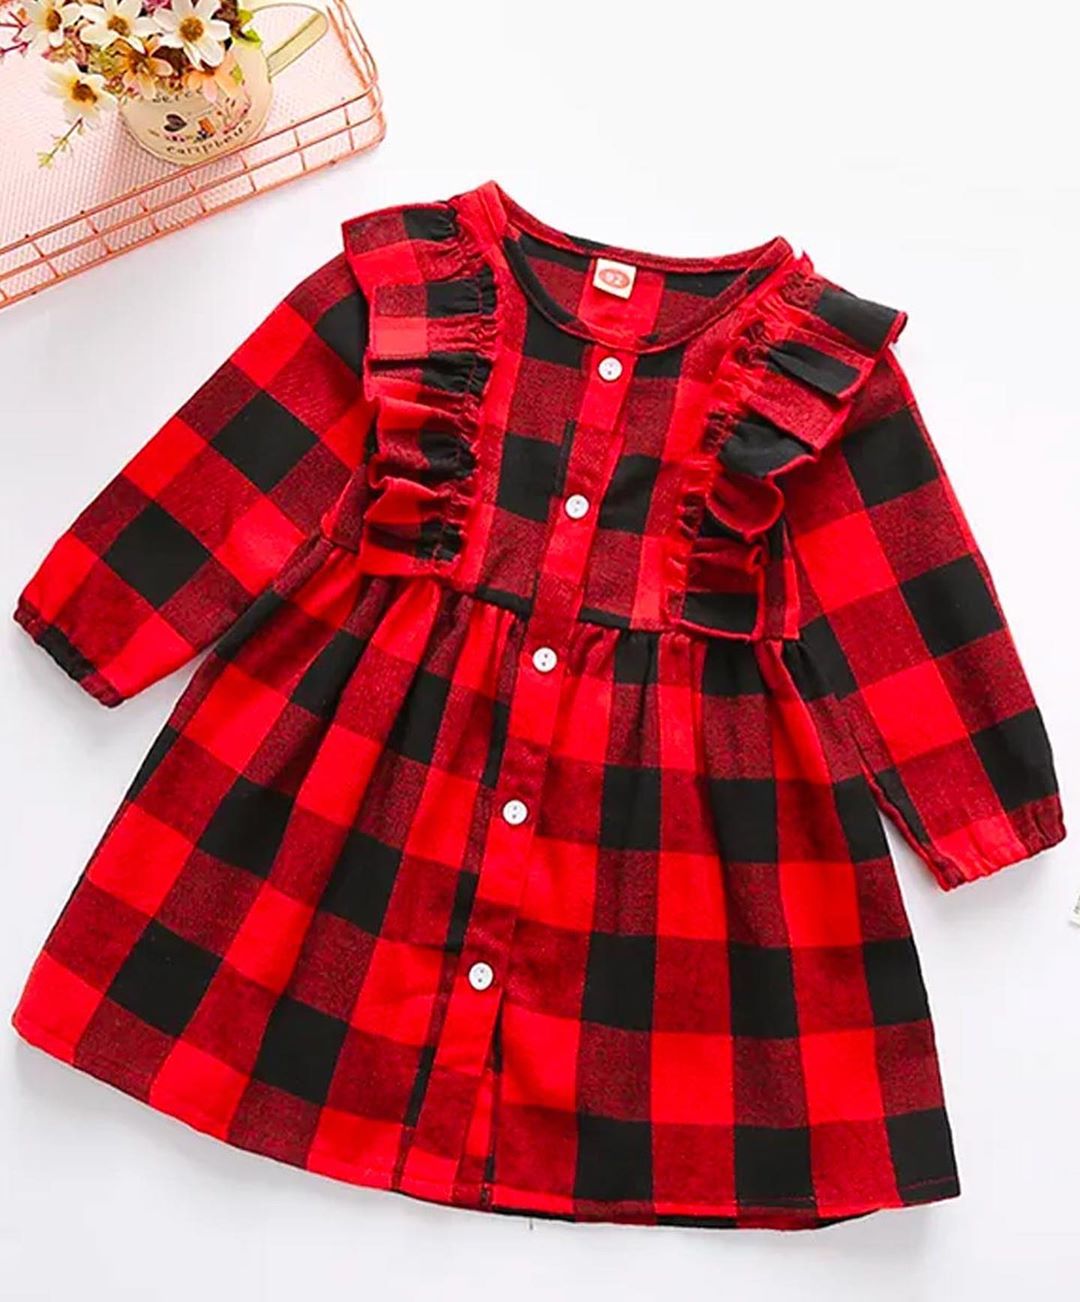 Hopscotch - It’s never too early to start filling up your little one’s wardrobe will fall ready styles! 🍁
Tap to shop these plaid dresses today!👆🏻
P.S - These are limited edition styles which are avai...